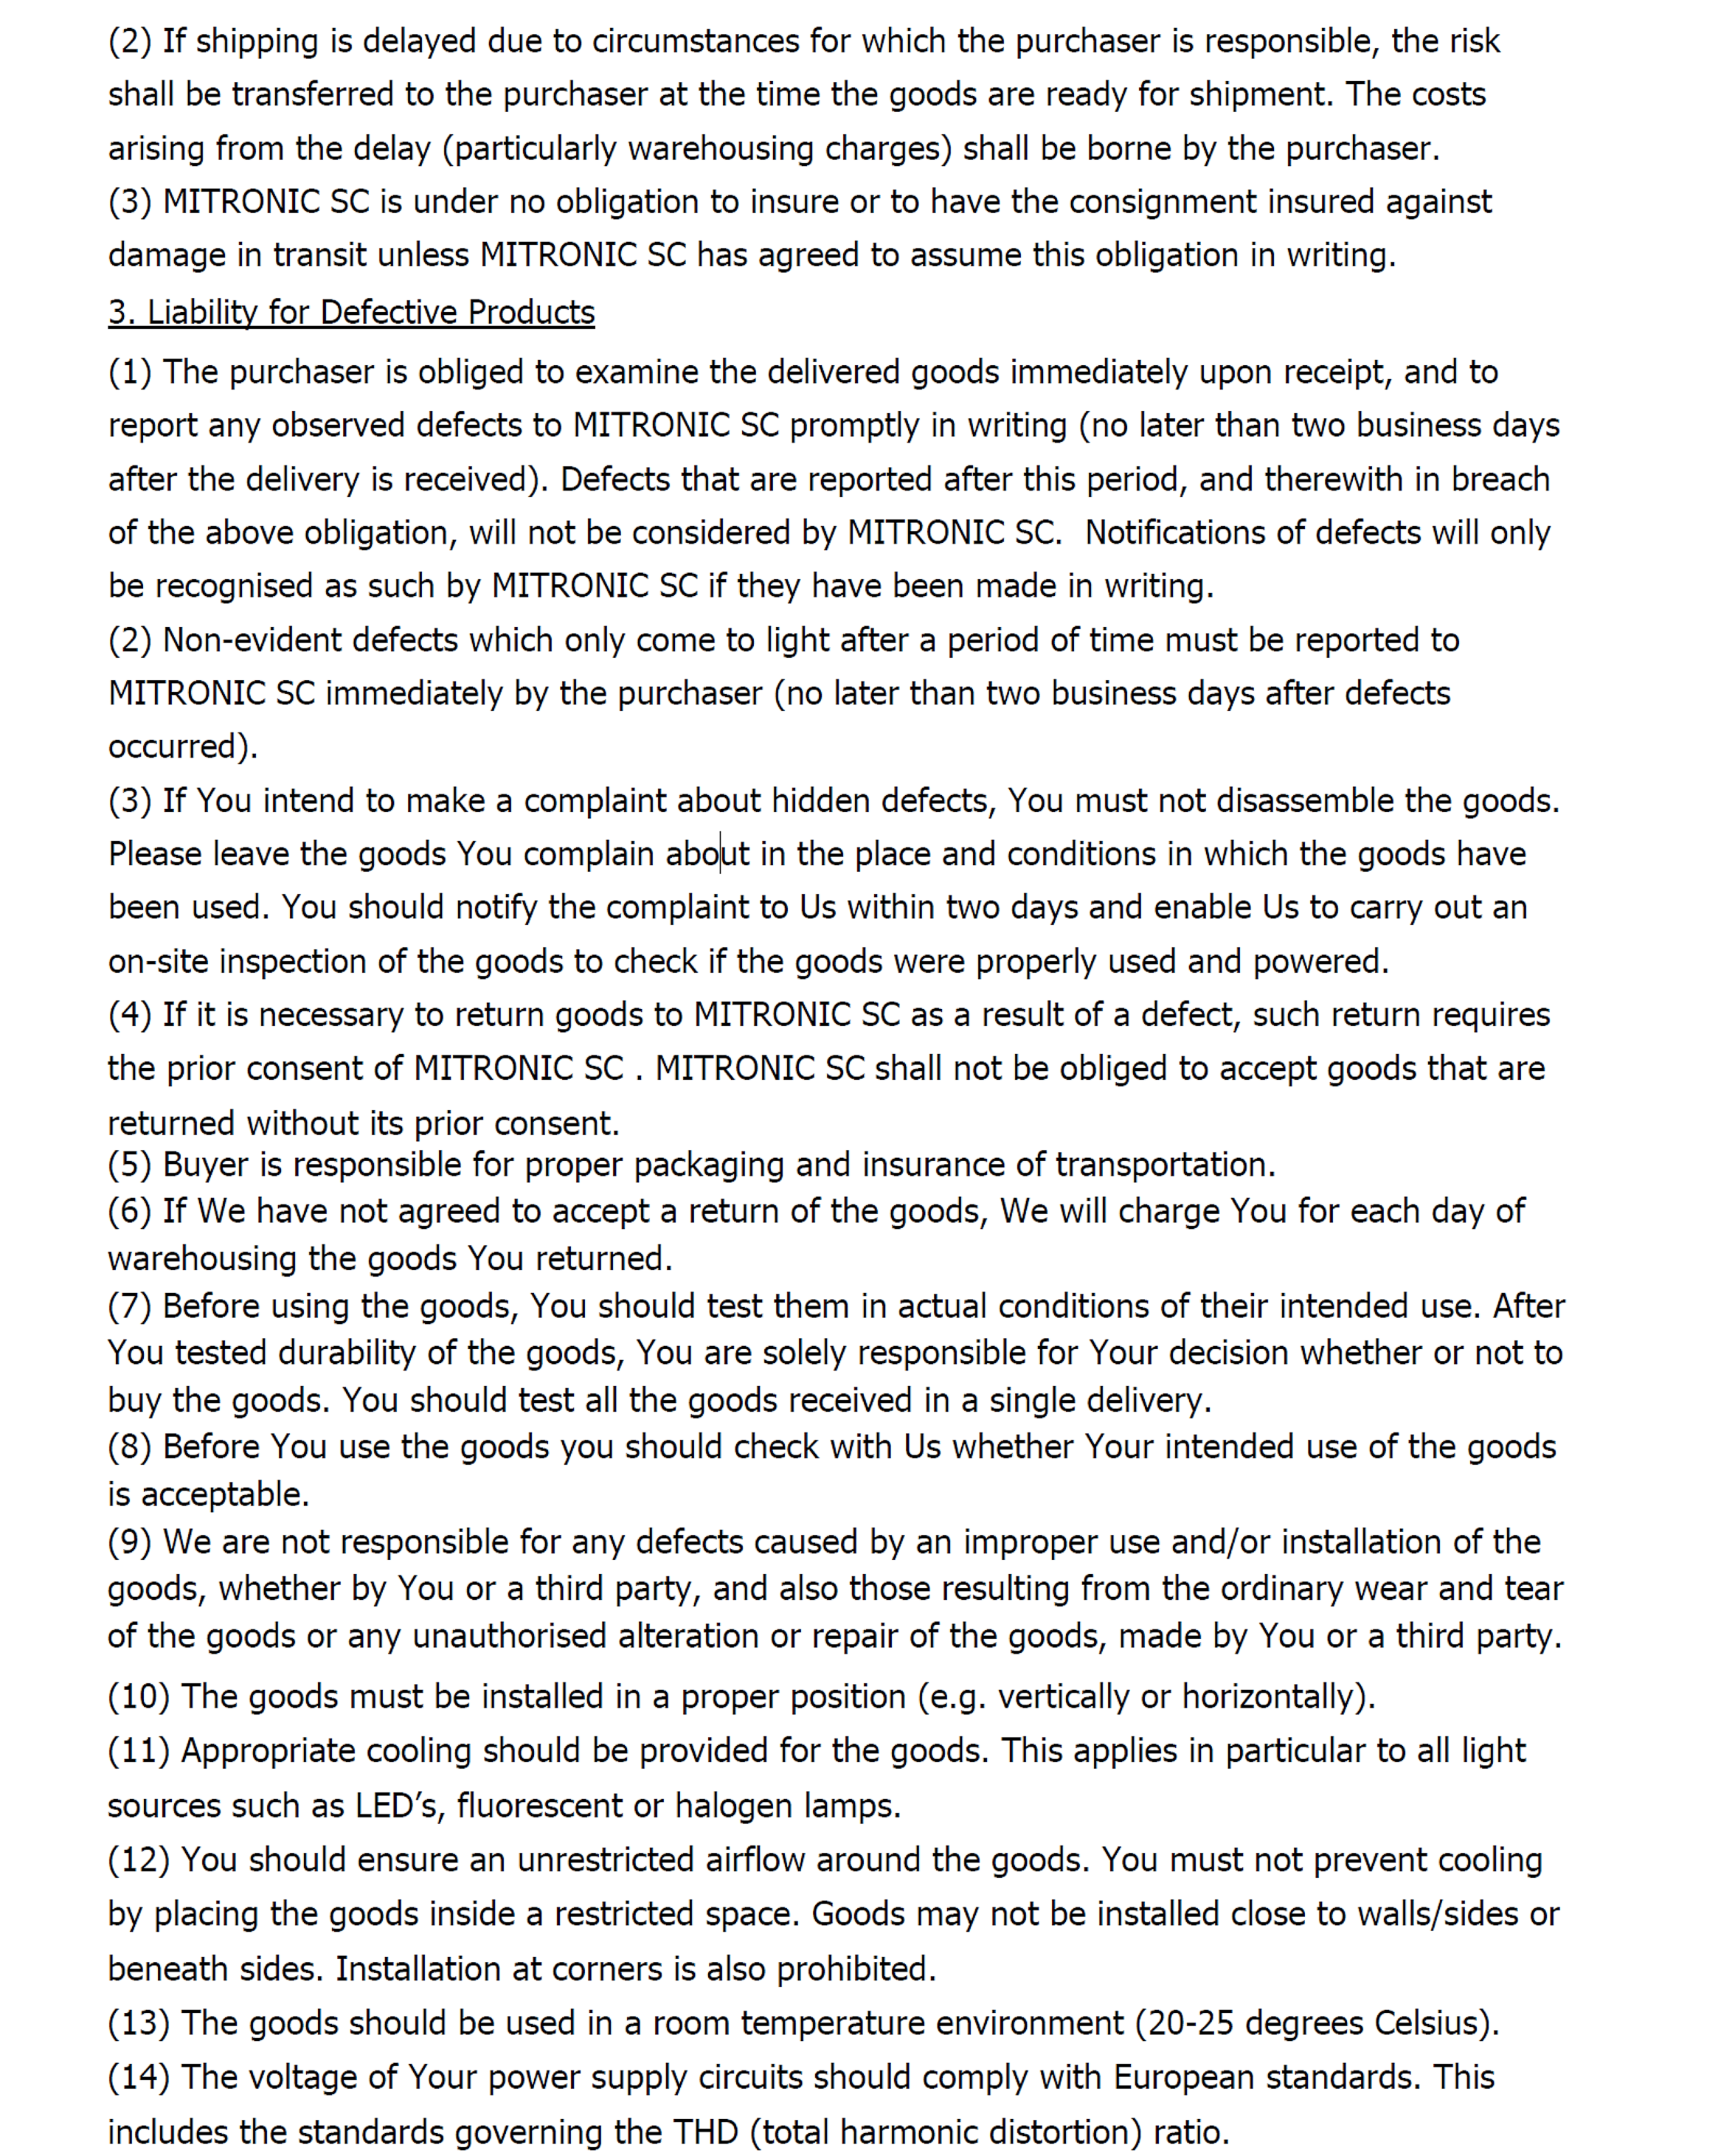 General Terms and Conditions MITRONIC SC 2011 - 2